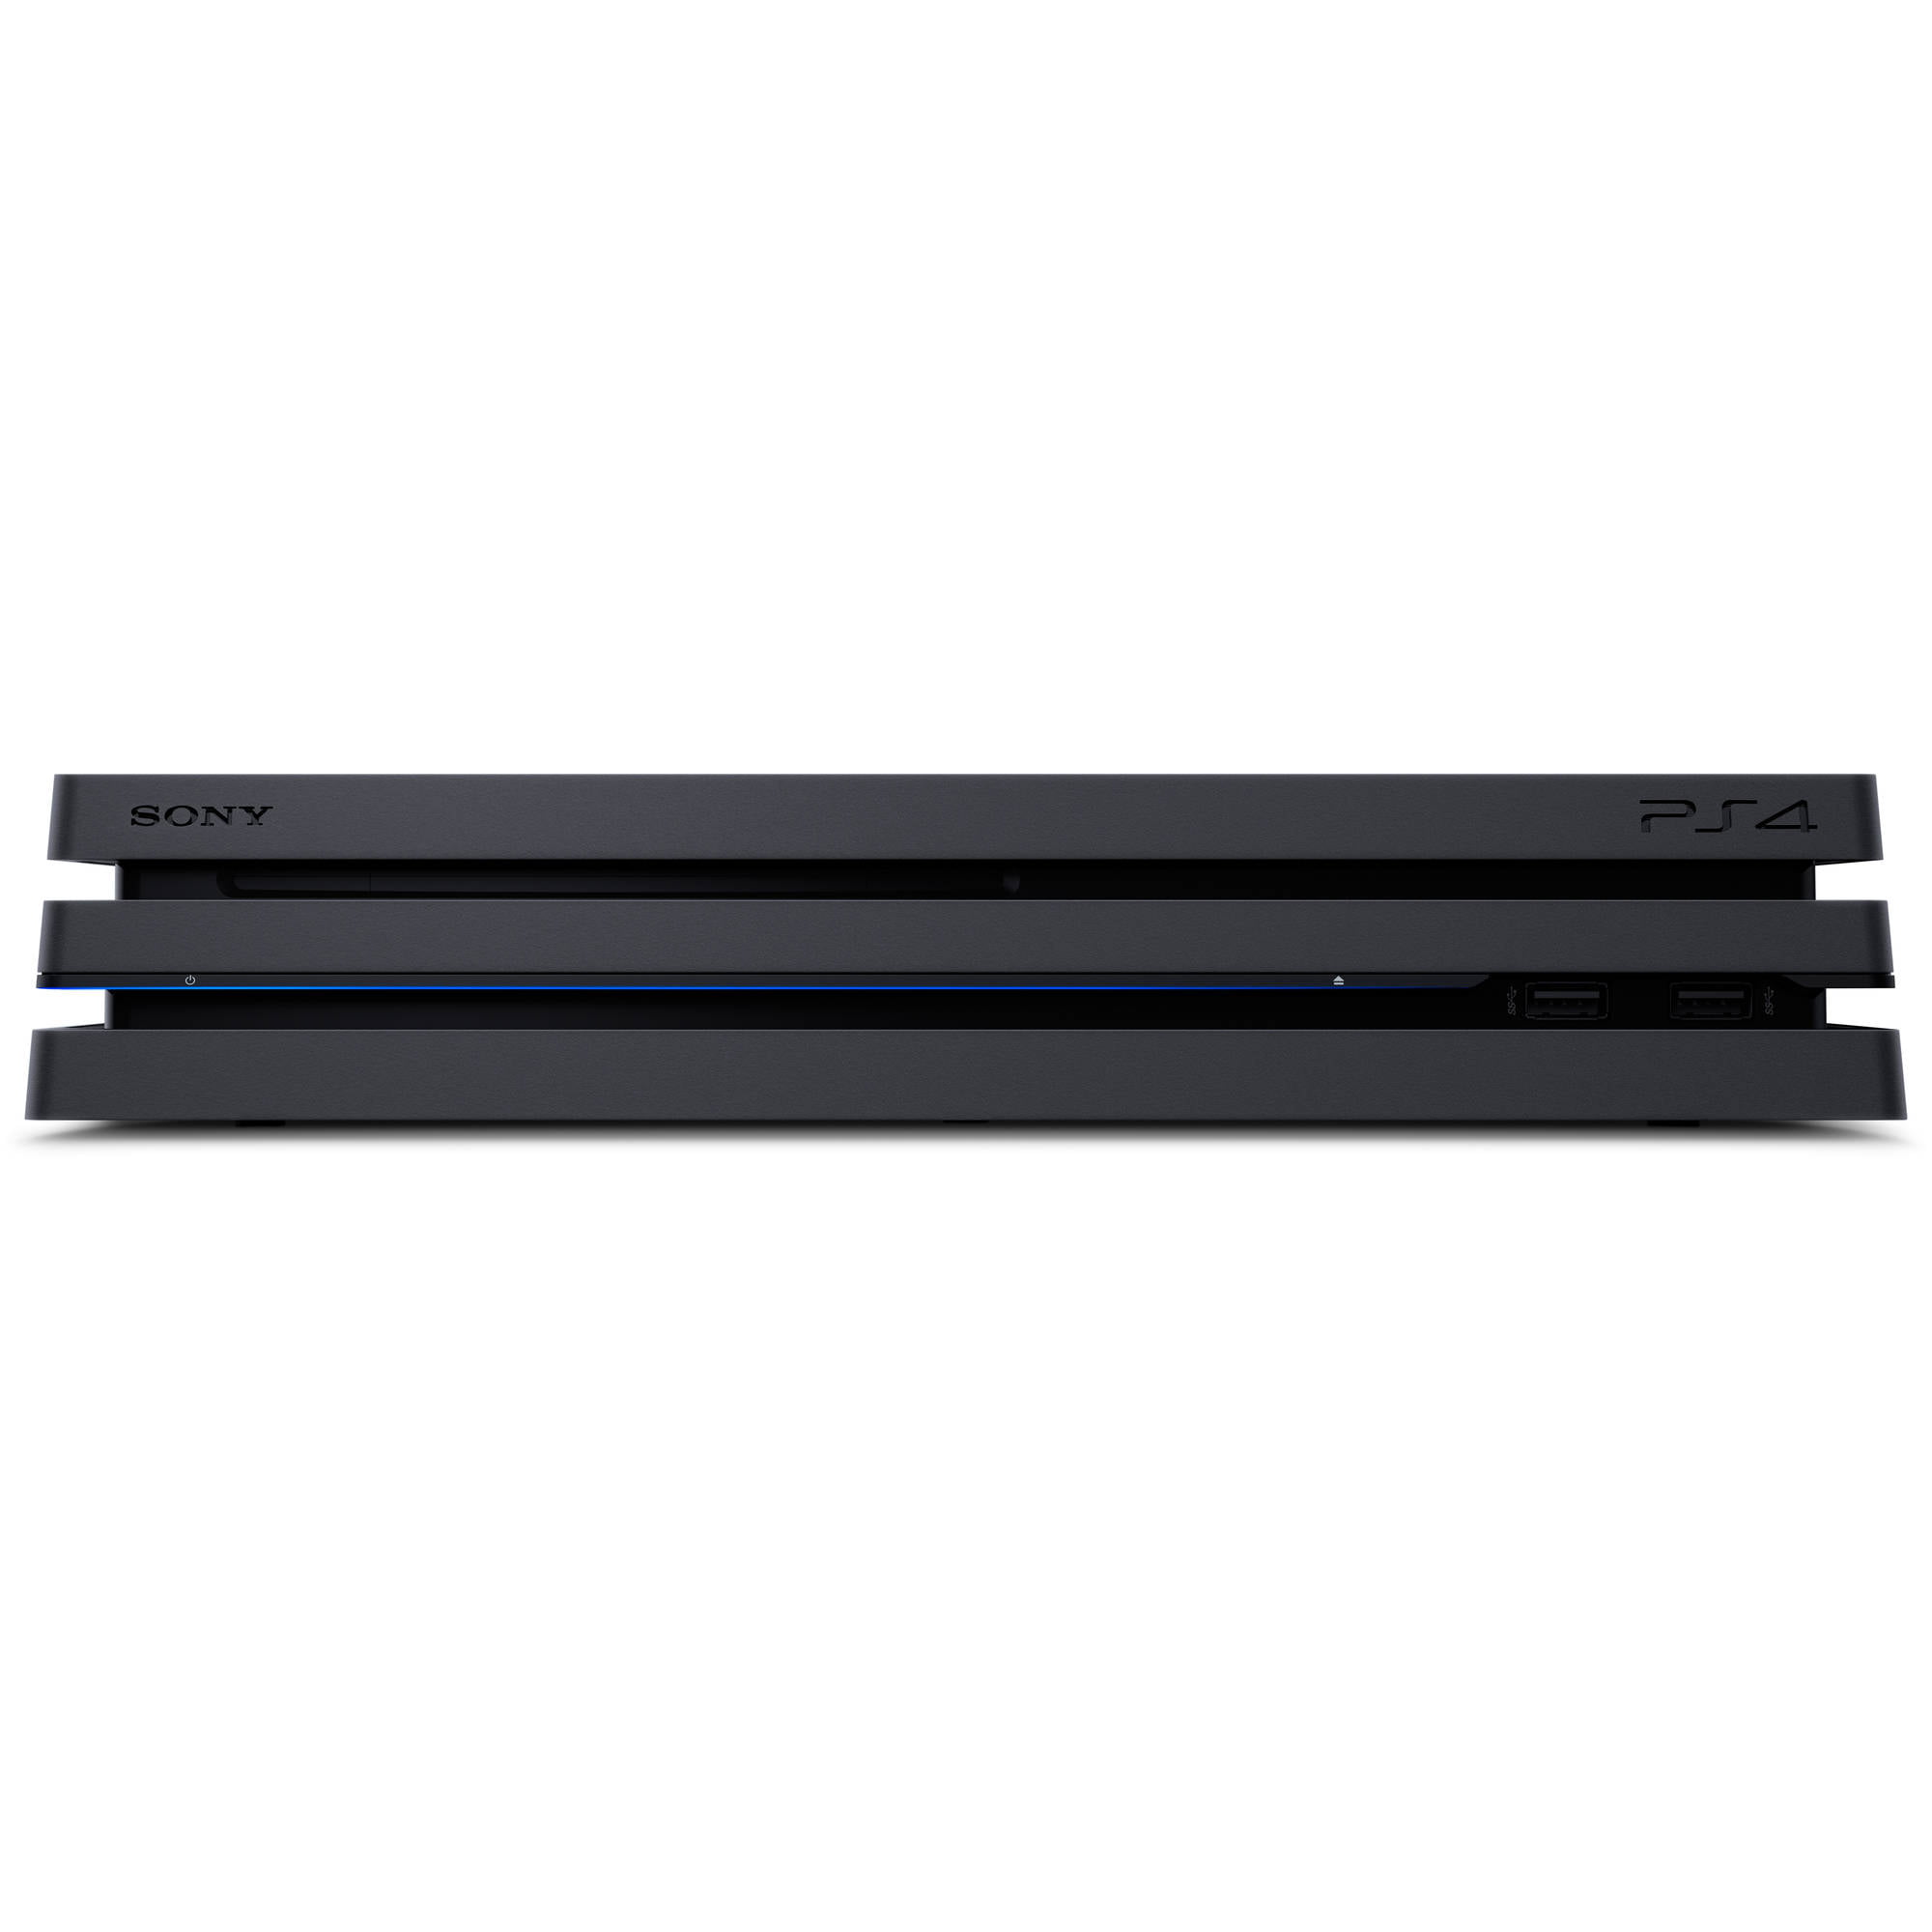 PlayStation 4 Pro 1TB Gaming Console, Black, 3001510